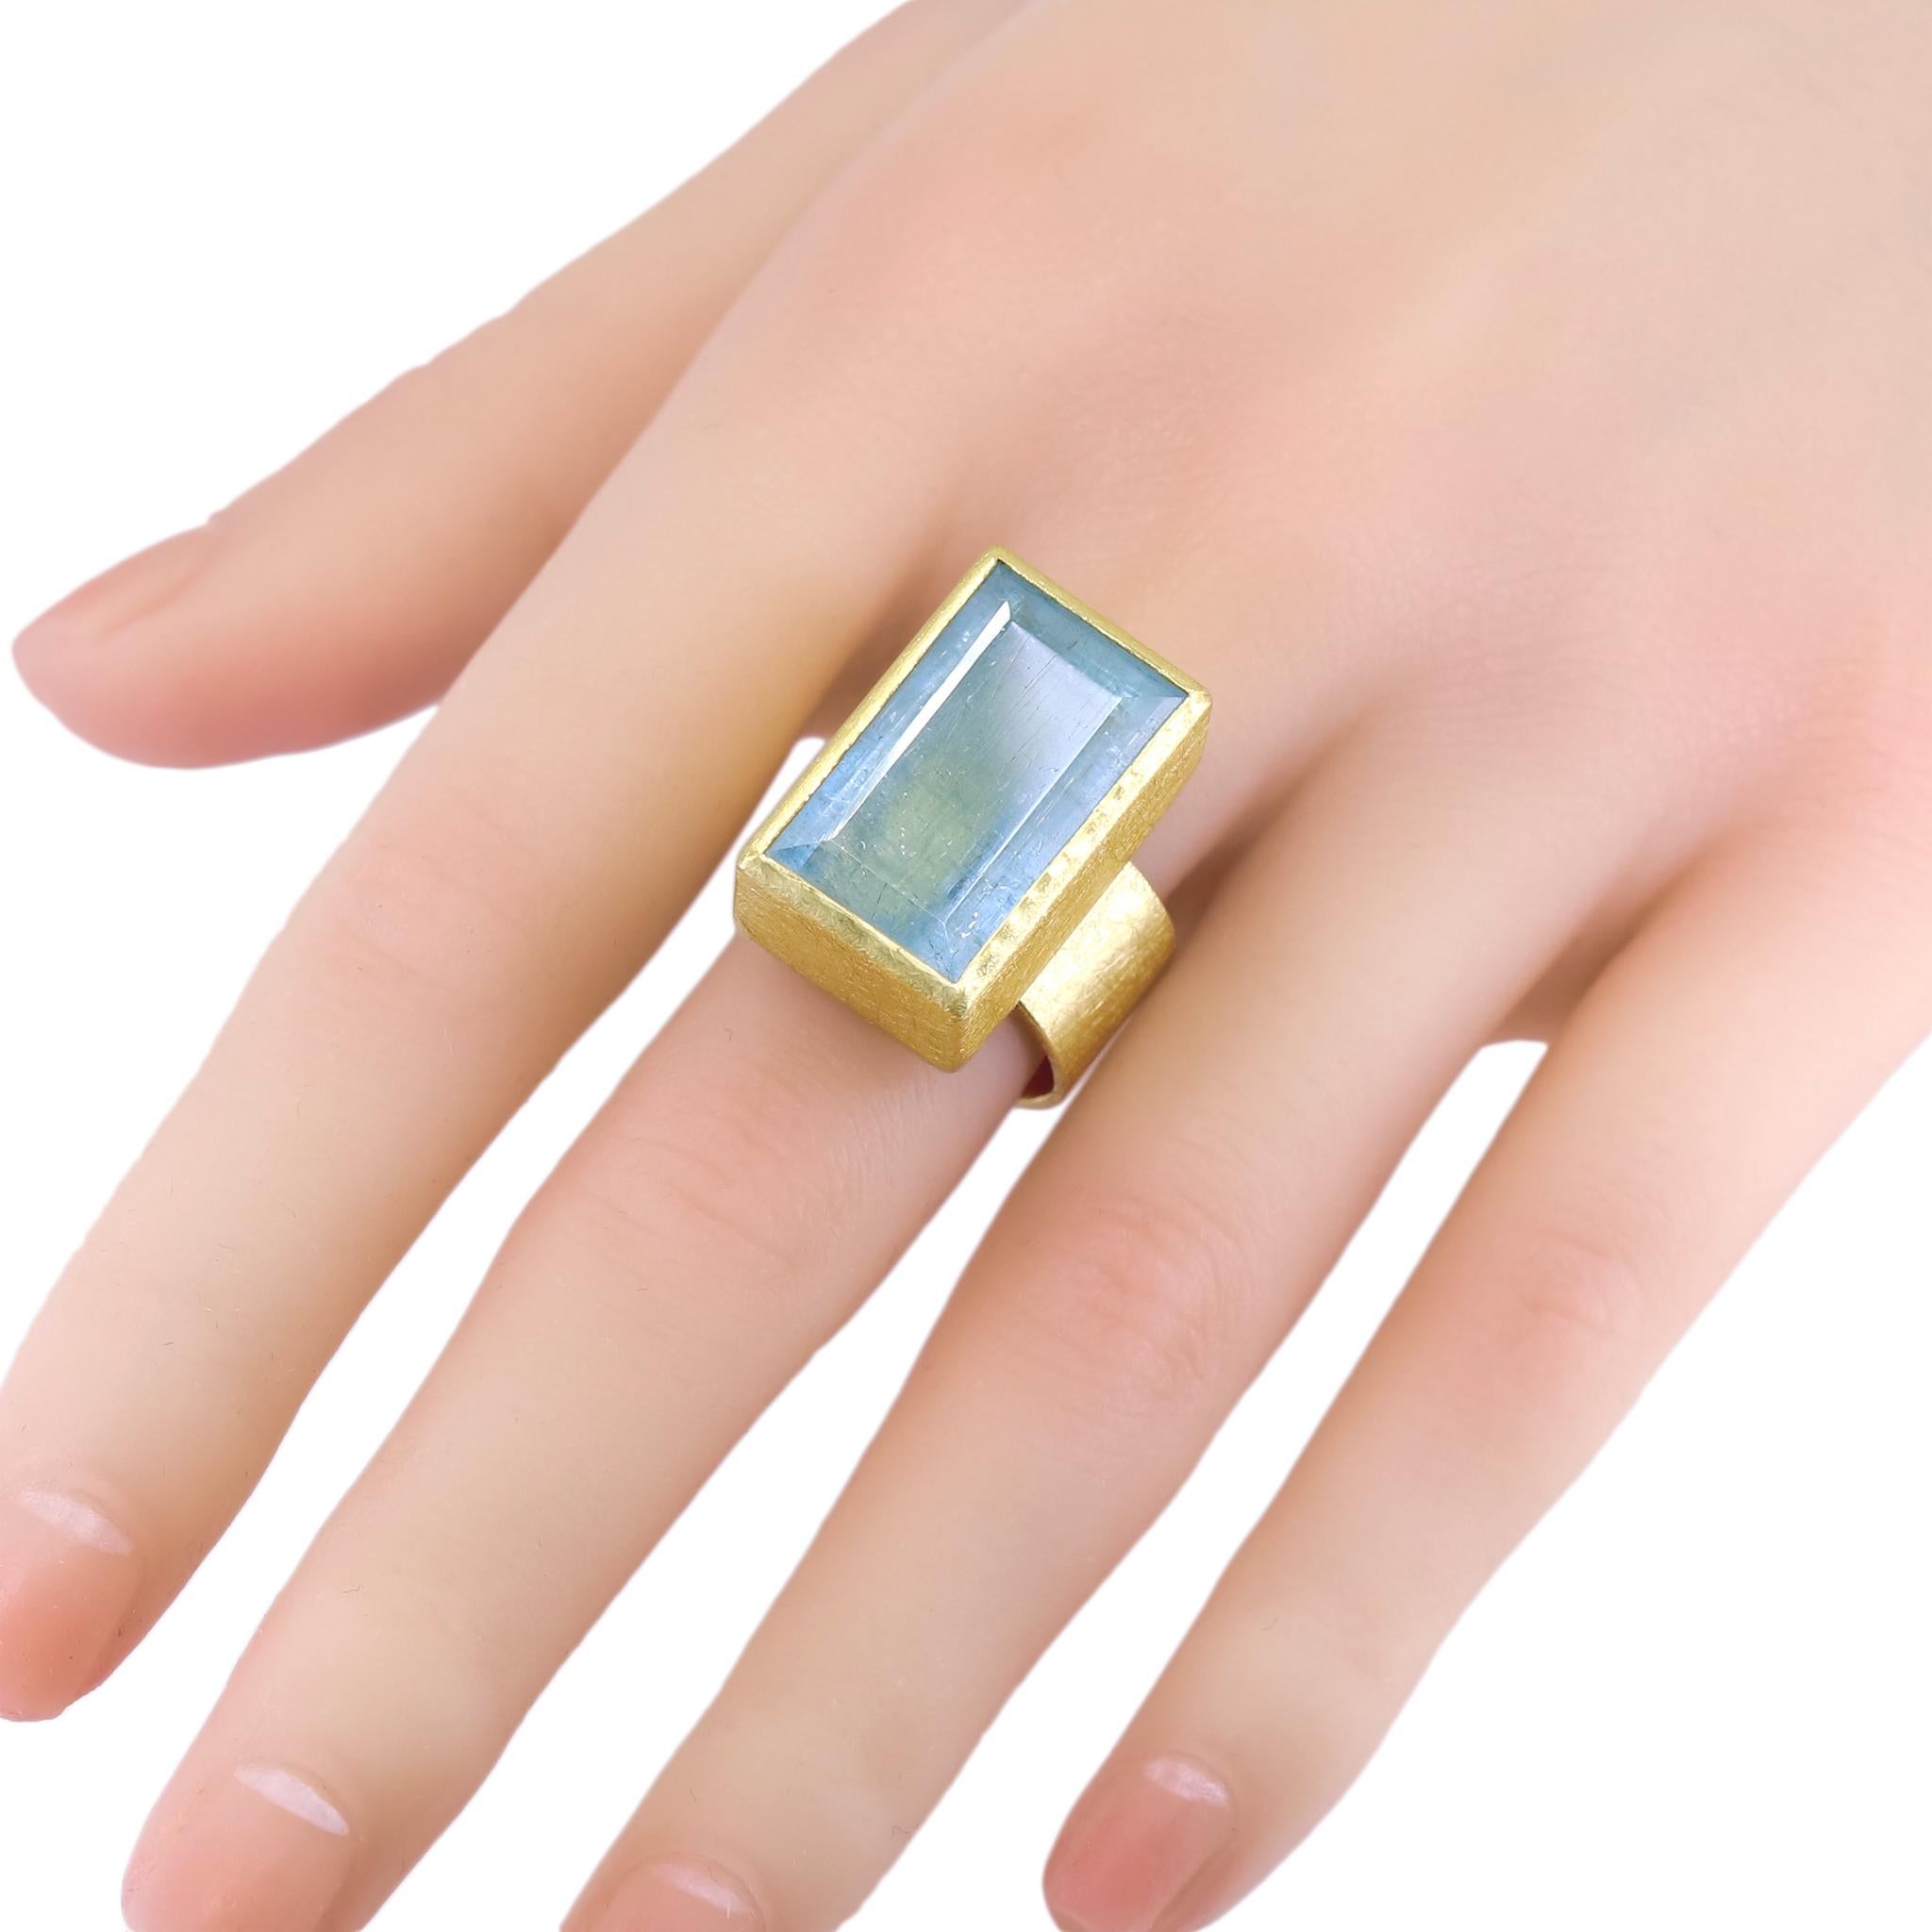 One of a Kind Cocktail Ring hand-fabricated by renowned jewelry maker Petra Class featuring a large 22.45 carat natural rectangular faceted aquamarine bezel-set in signature finished 22k yellow gold atop a 10mm wide 18k yellow gold band. Size 7.5